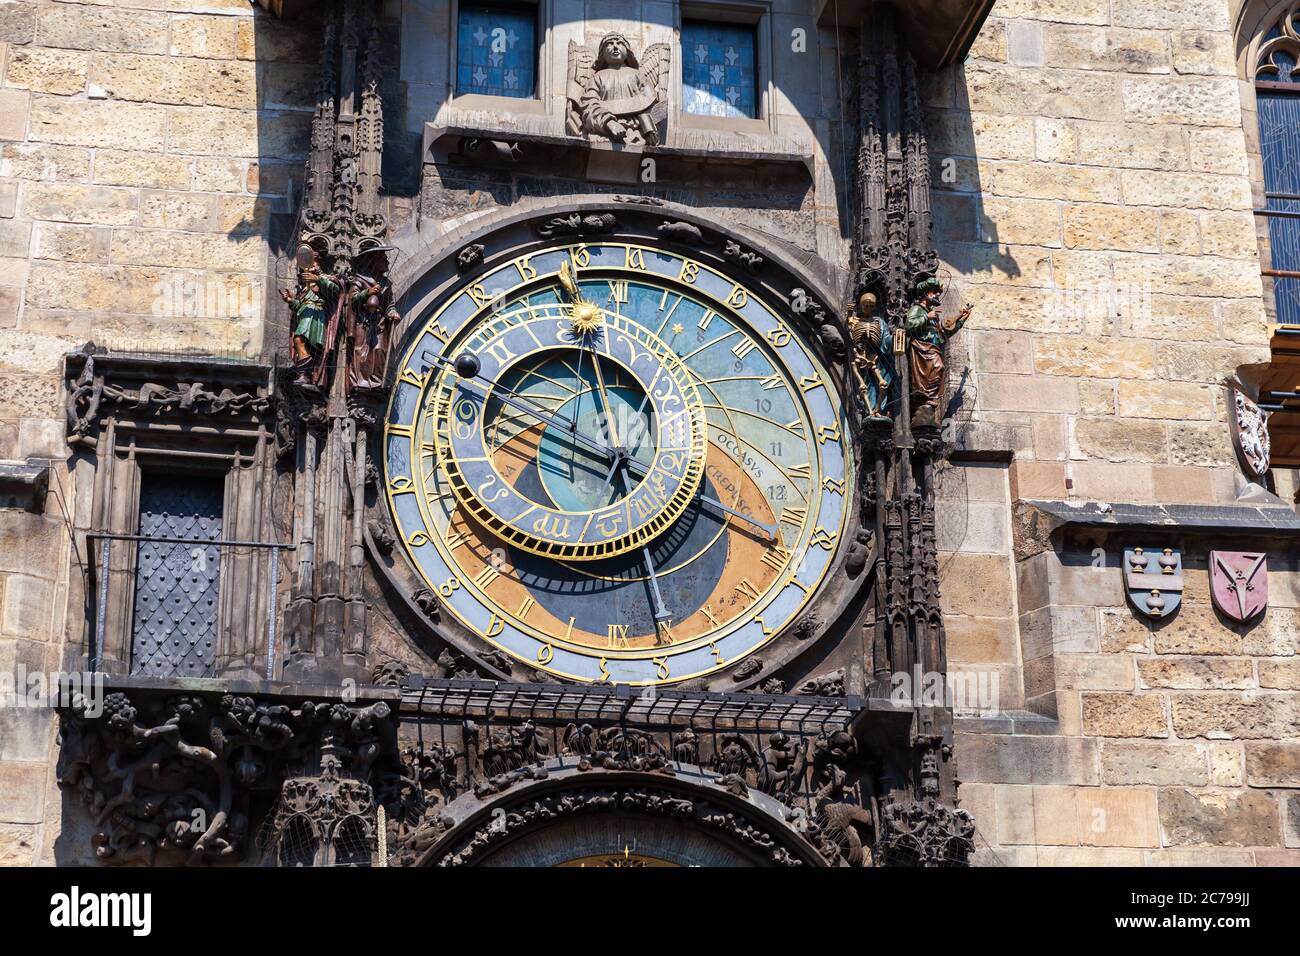 The Prague Astronomical Clock, or Prague Orloj. It is a medieval astronomical clock located in Prague, the capital of the Czech Republic Stock Photo